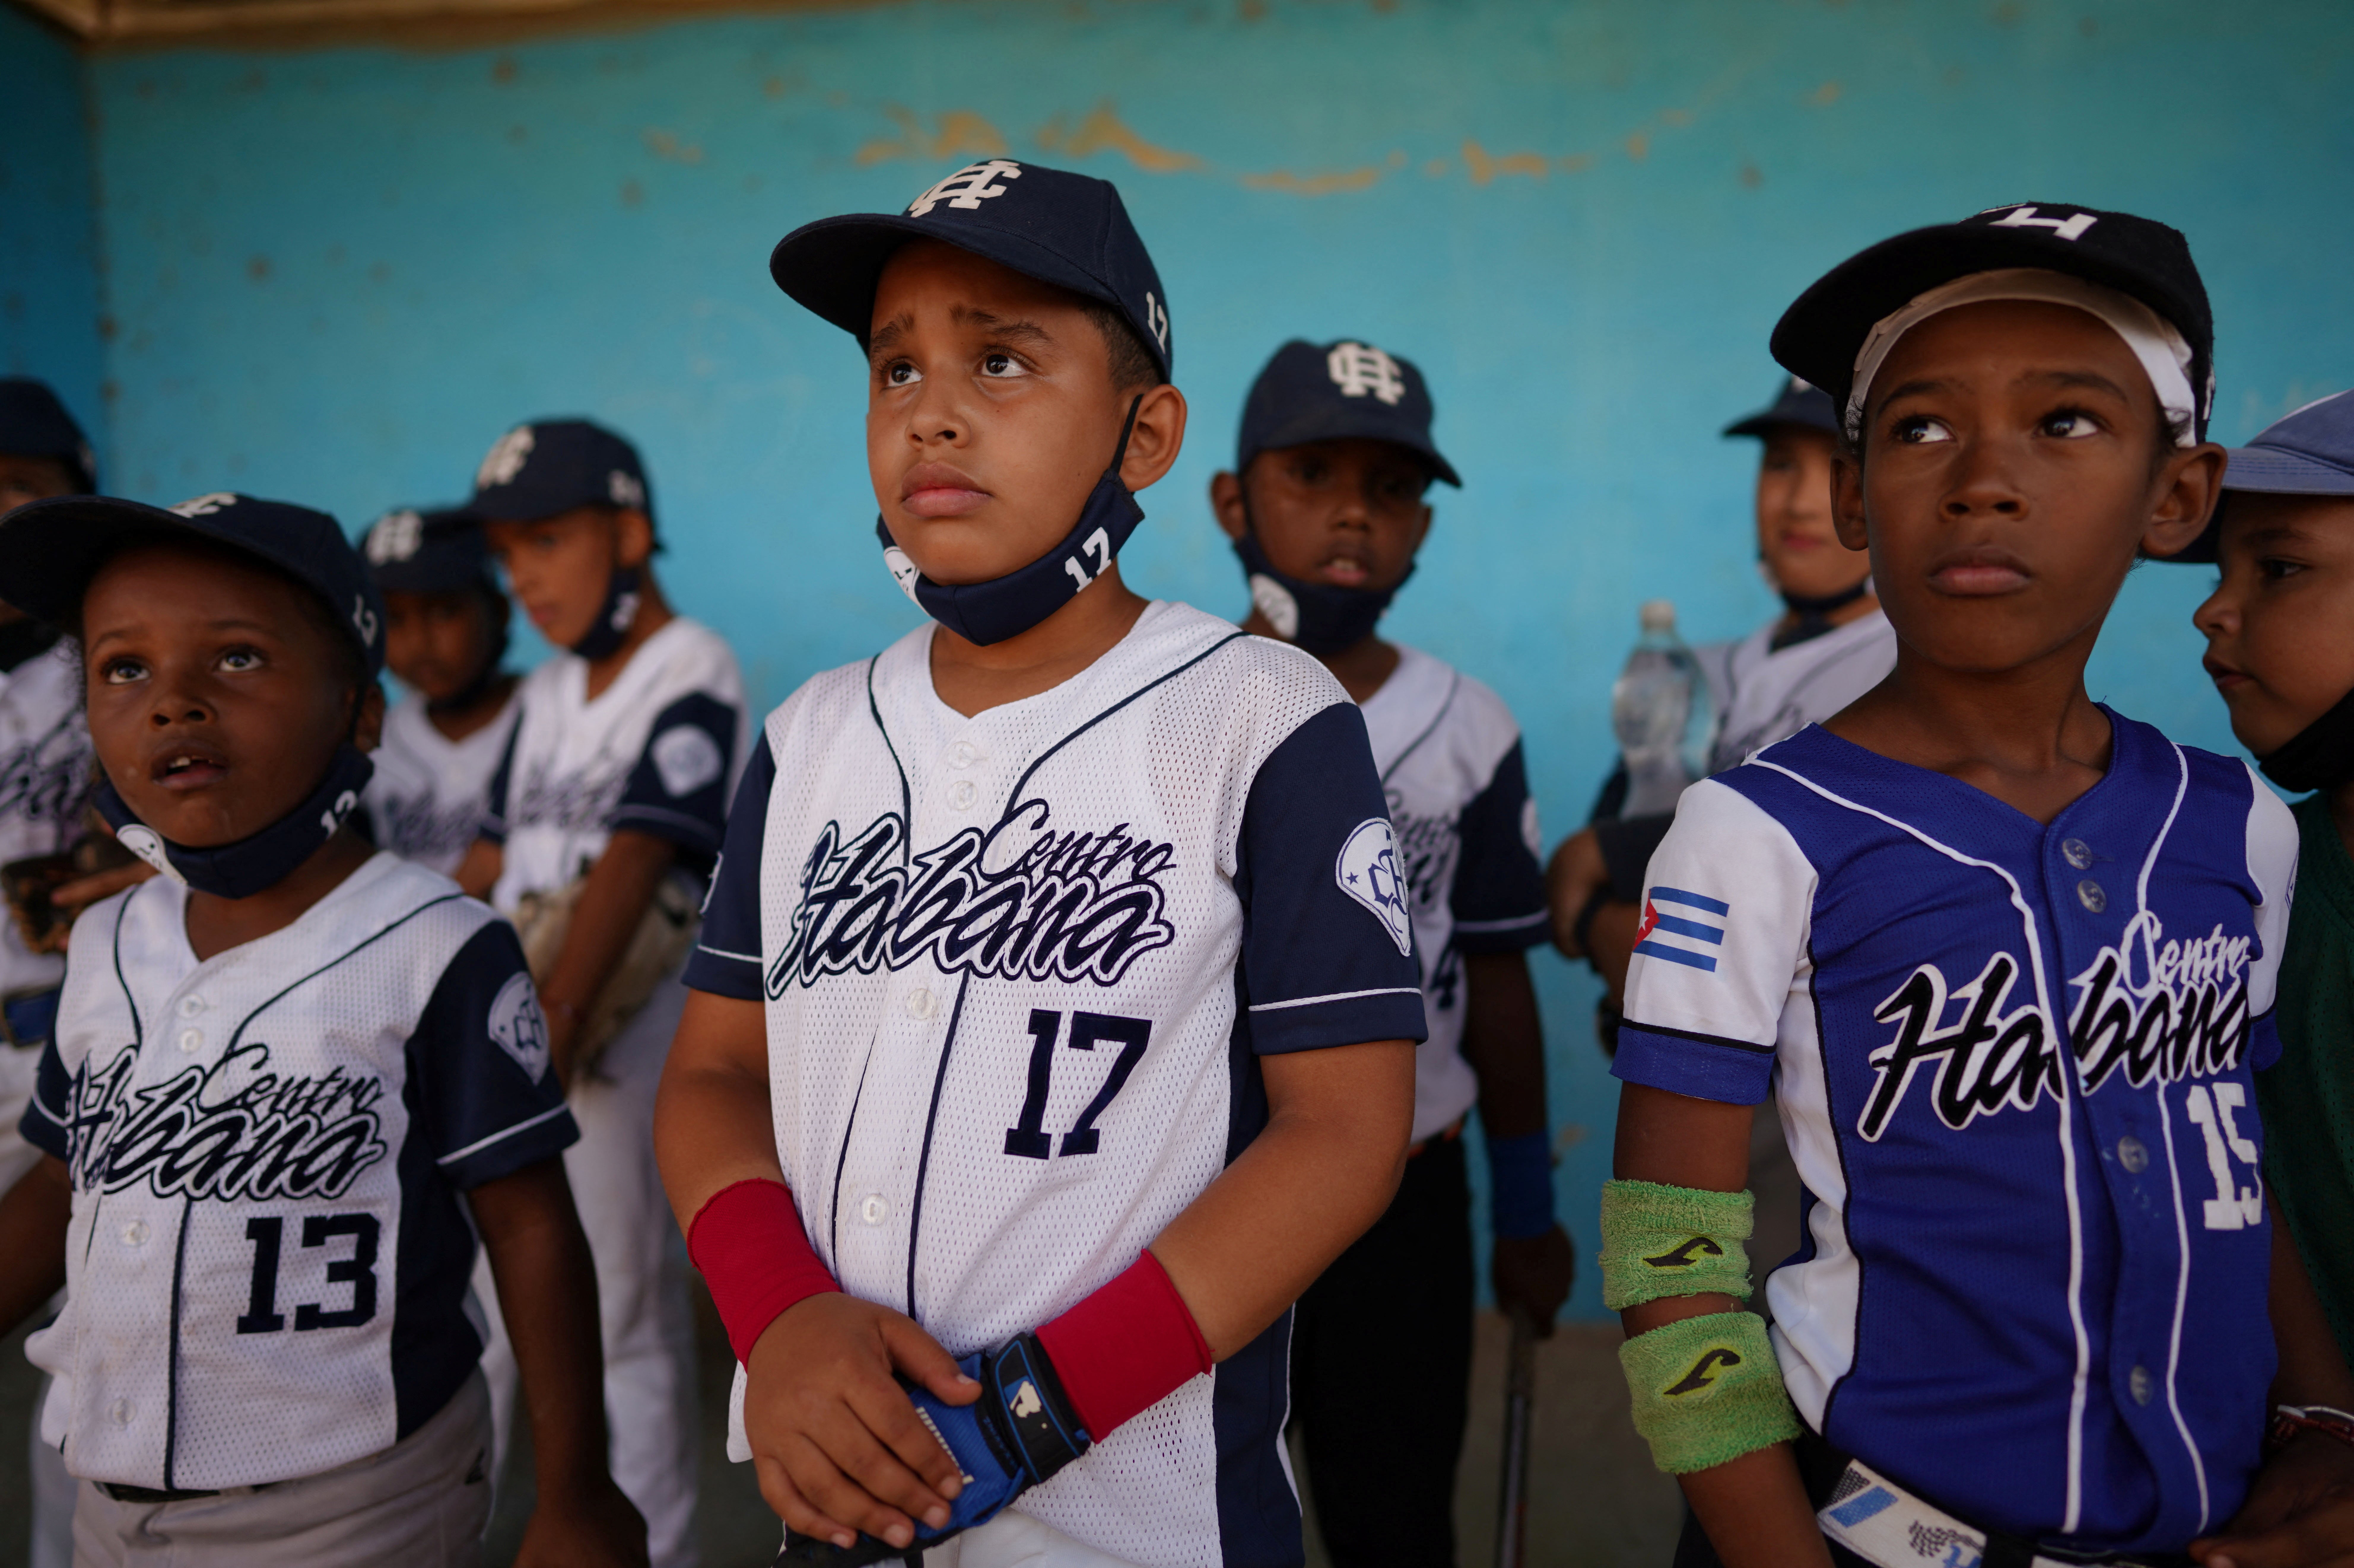 Cubas baseball players are flocking to the US with dreams of the major leagues The Independent